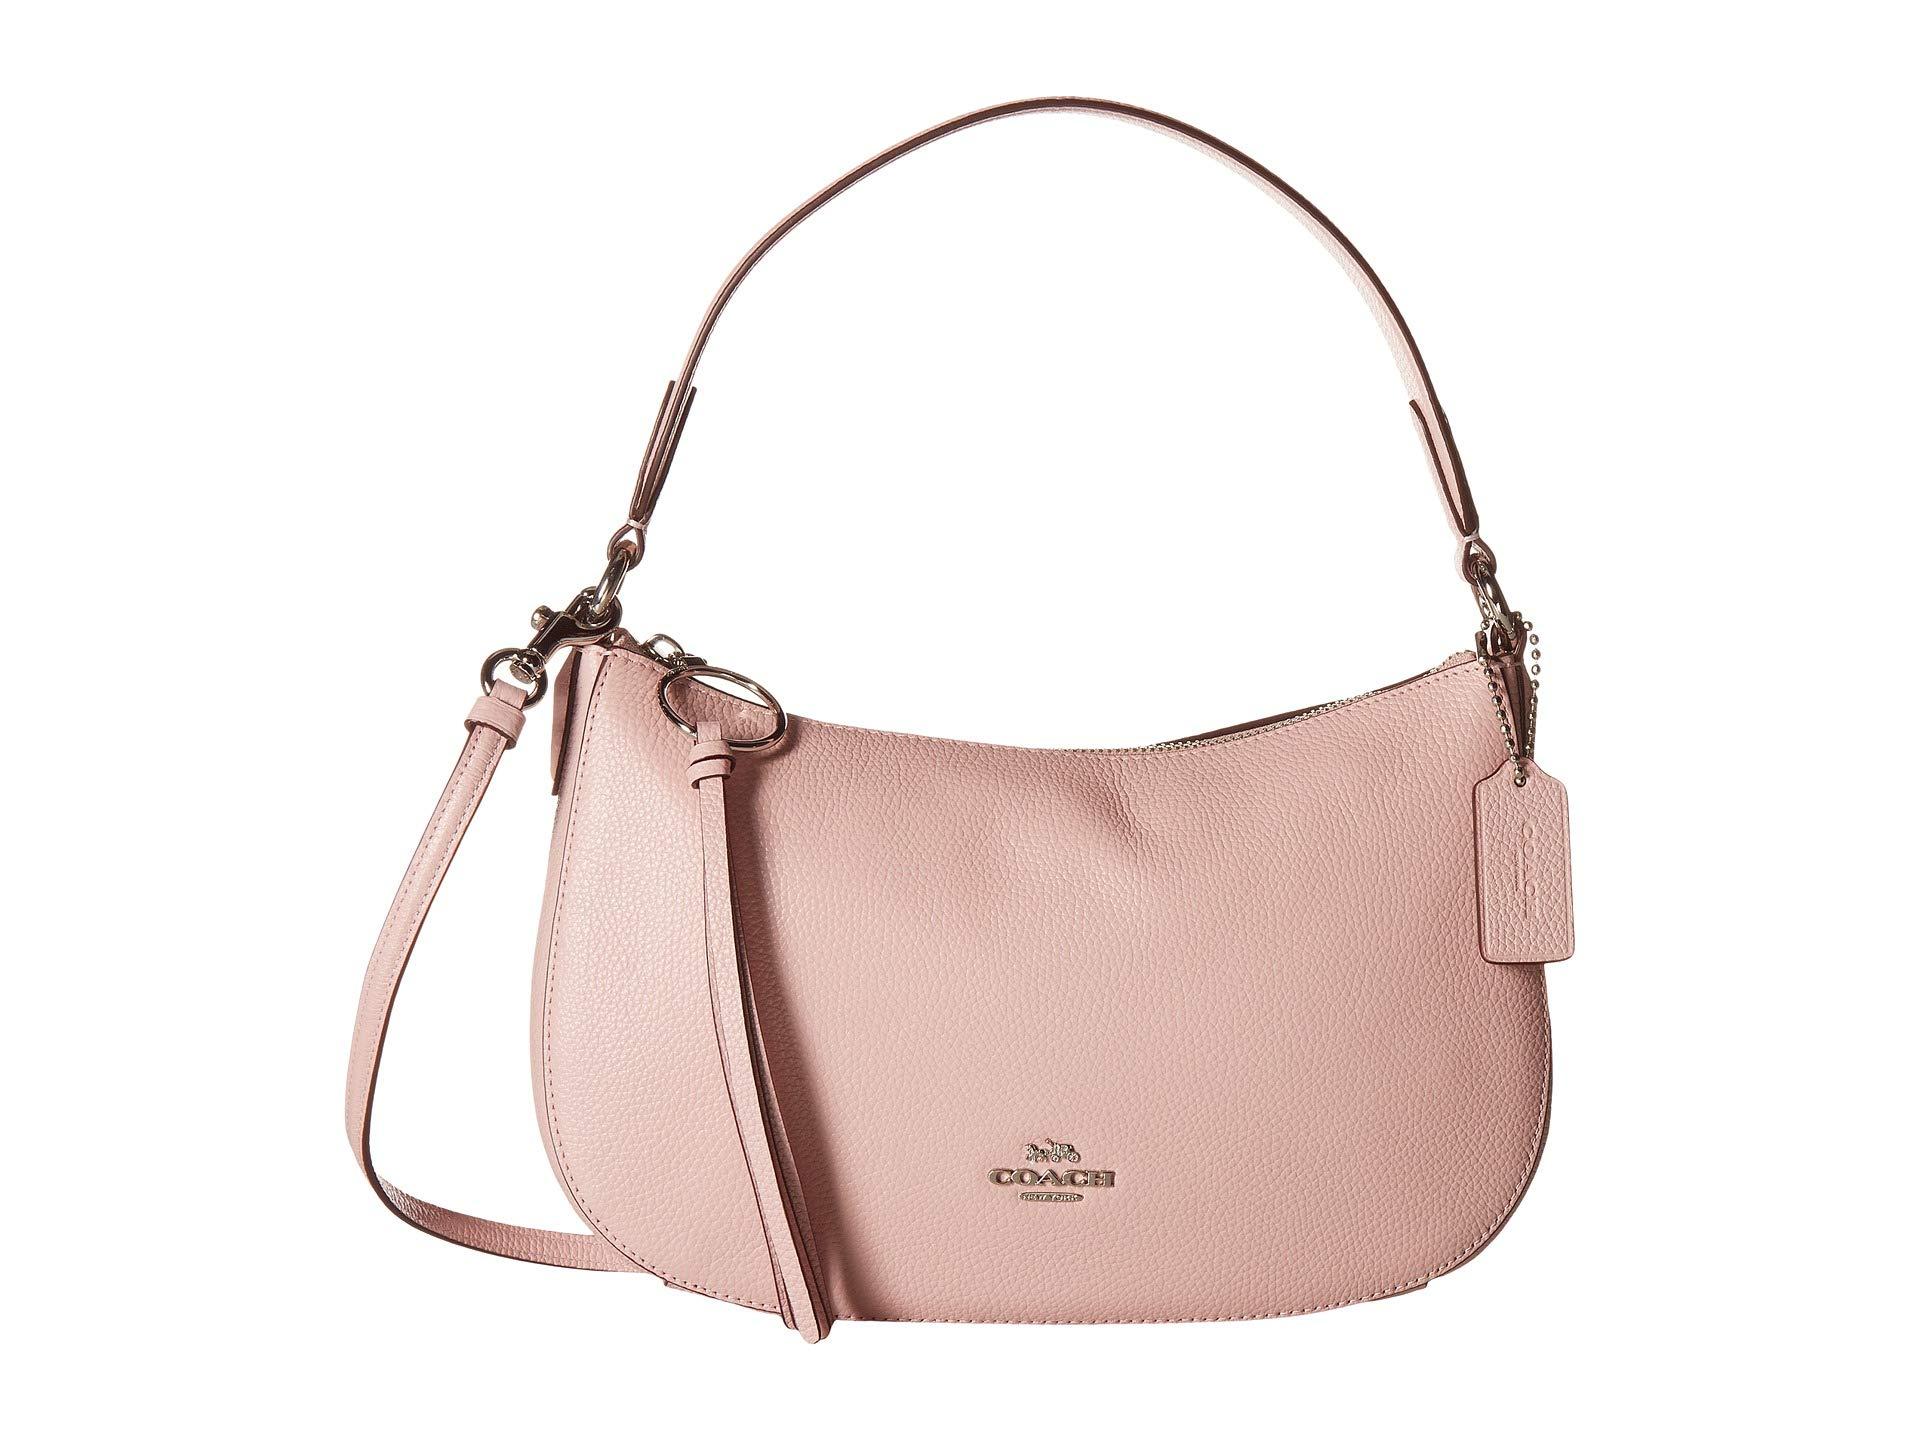 Lyst - COACH Polished Pebble Leather Sutton Crossbody (black/gold) Handbags in Pink